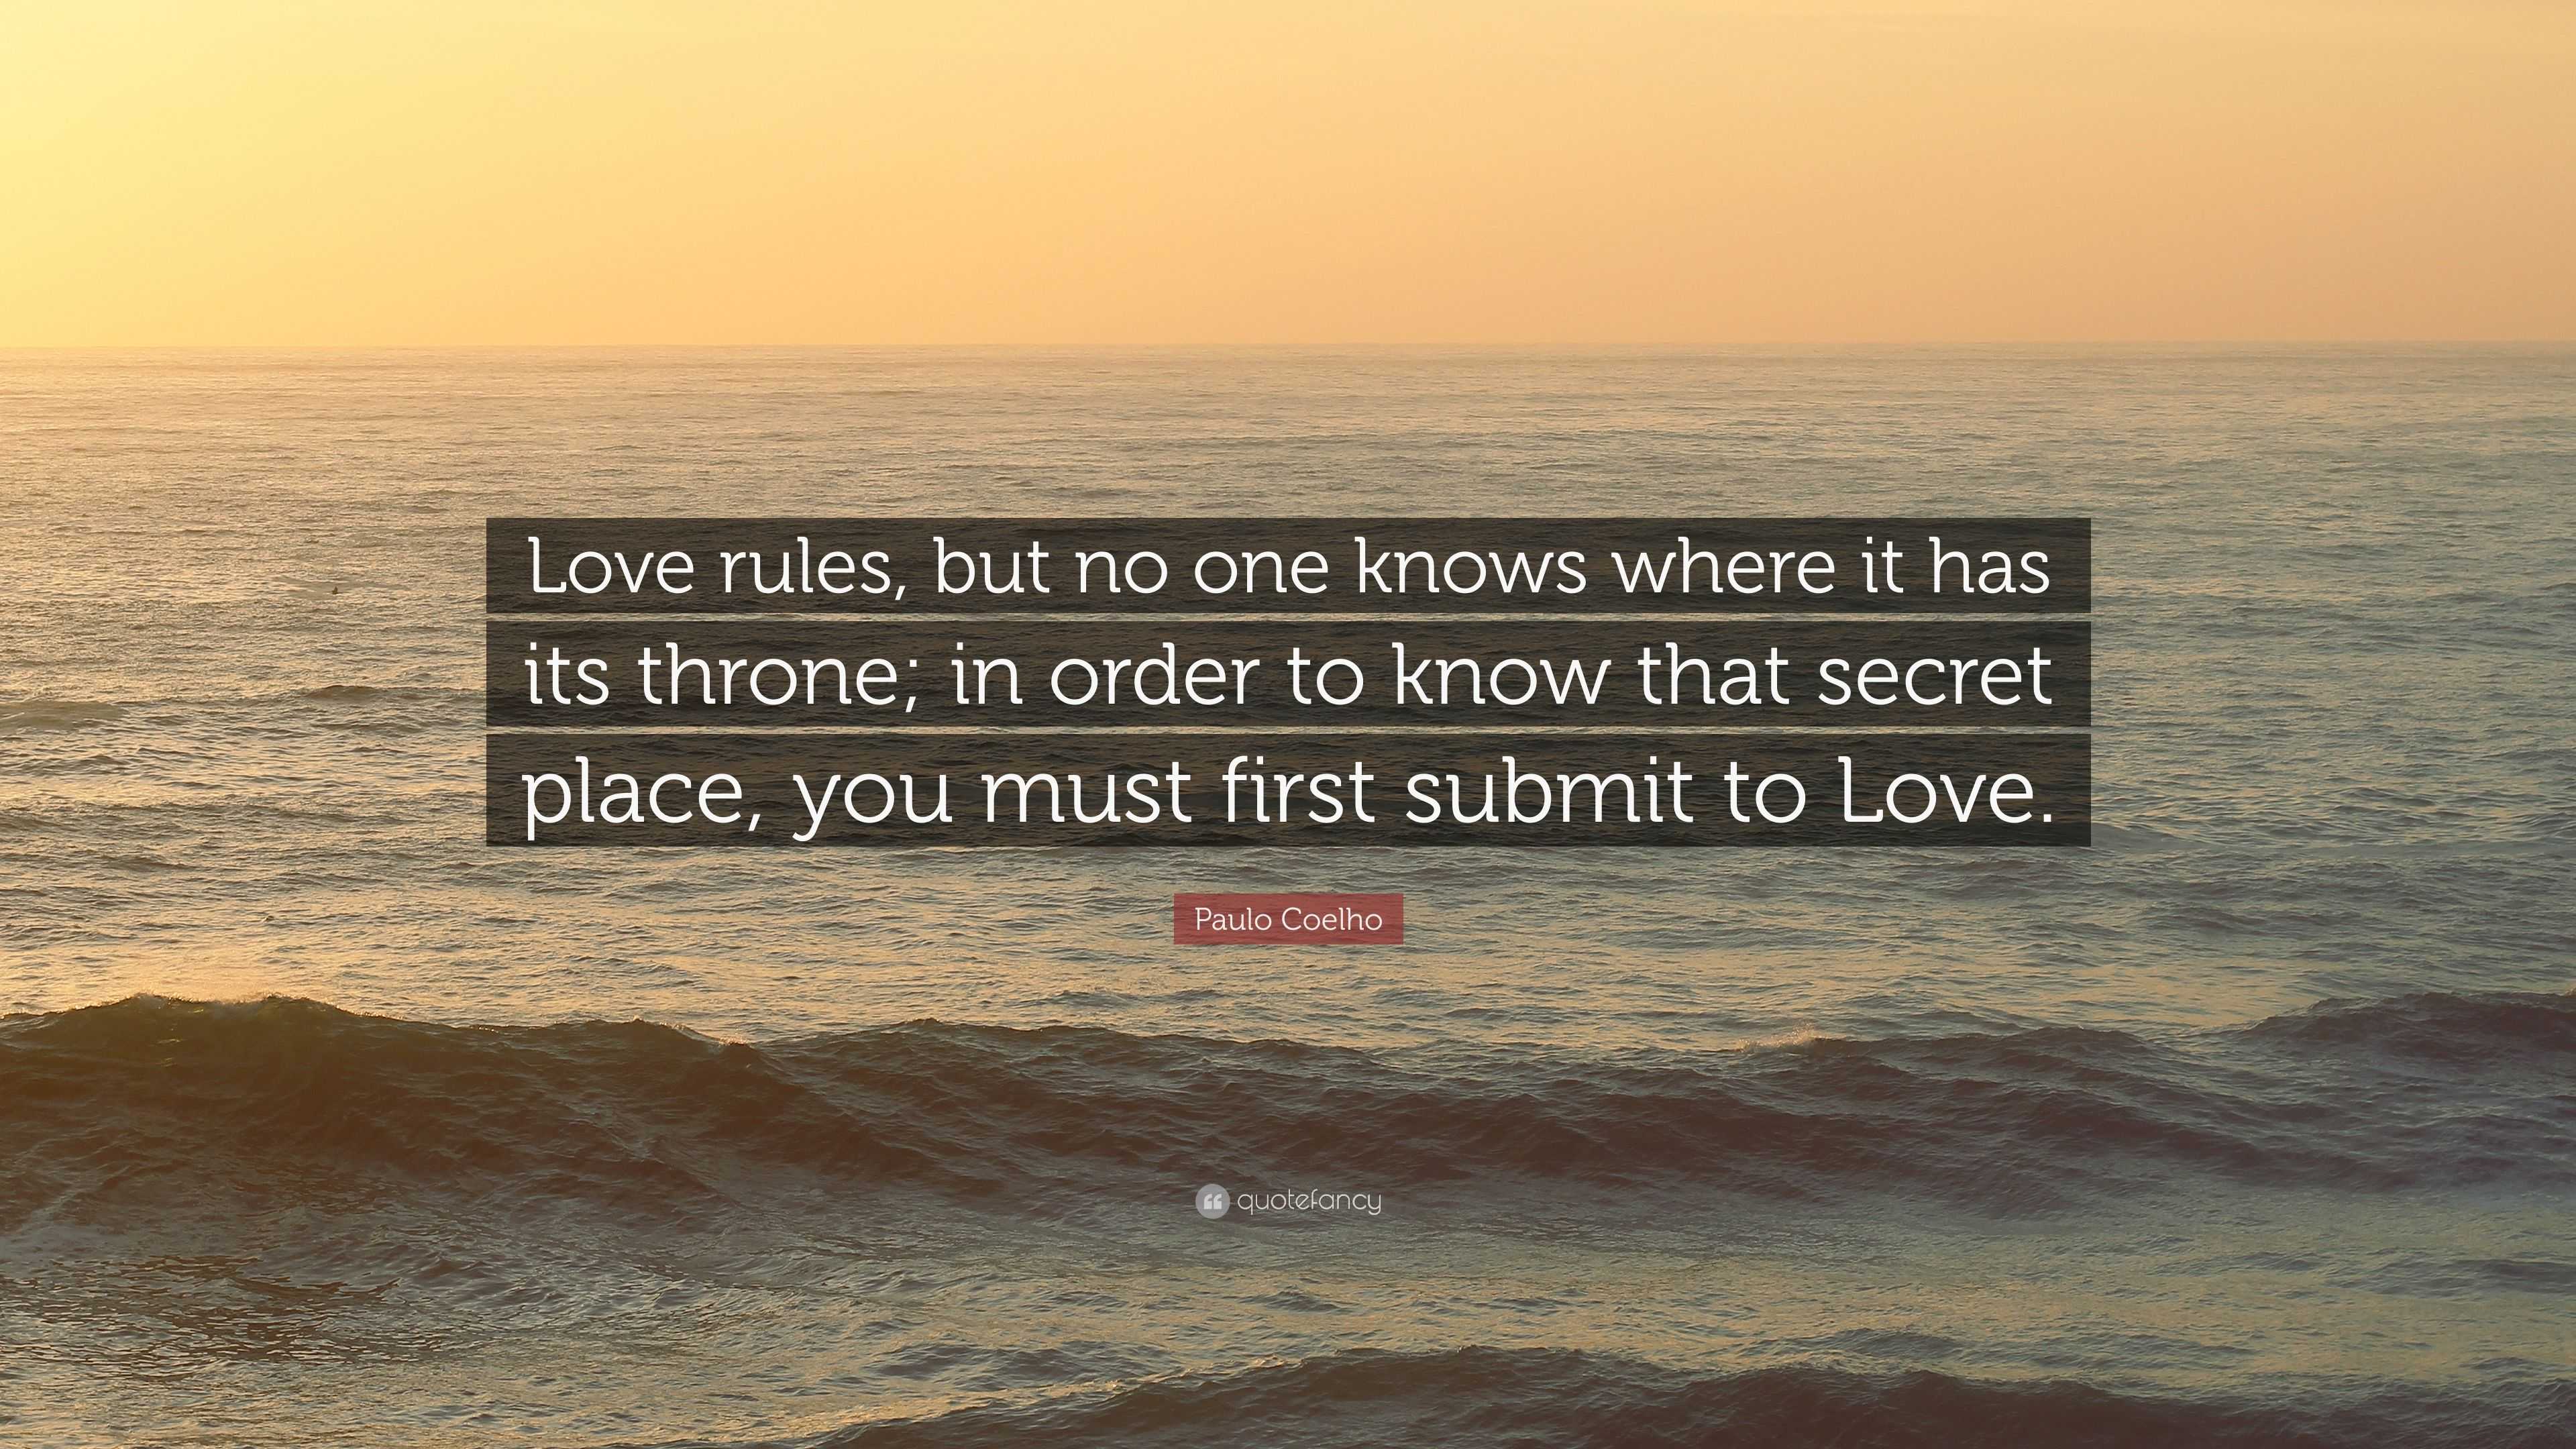 Paulo Coelho Quote “Love rules, but no one knows where it